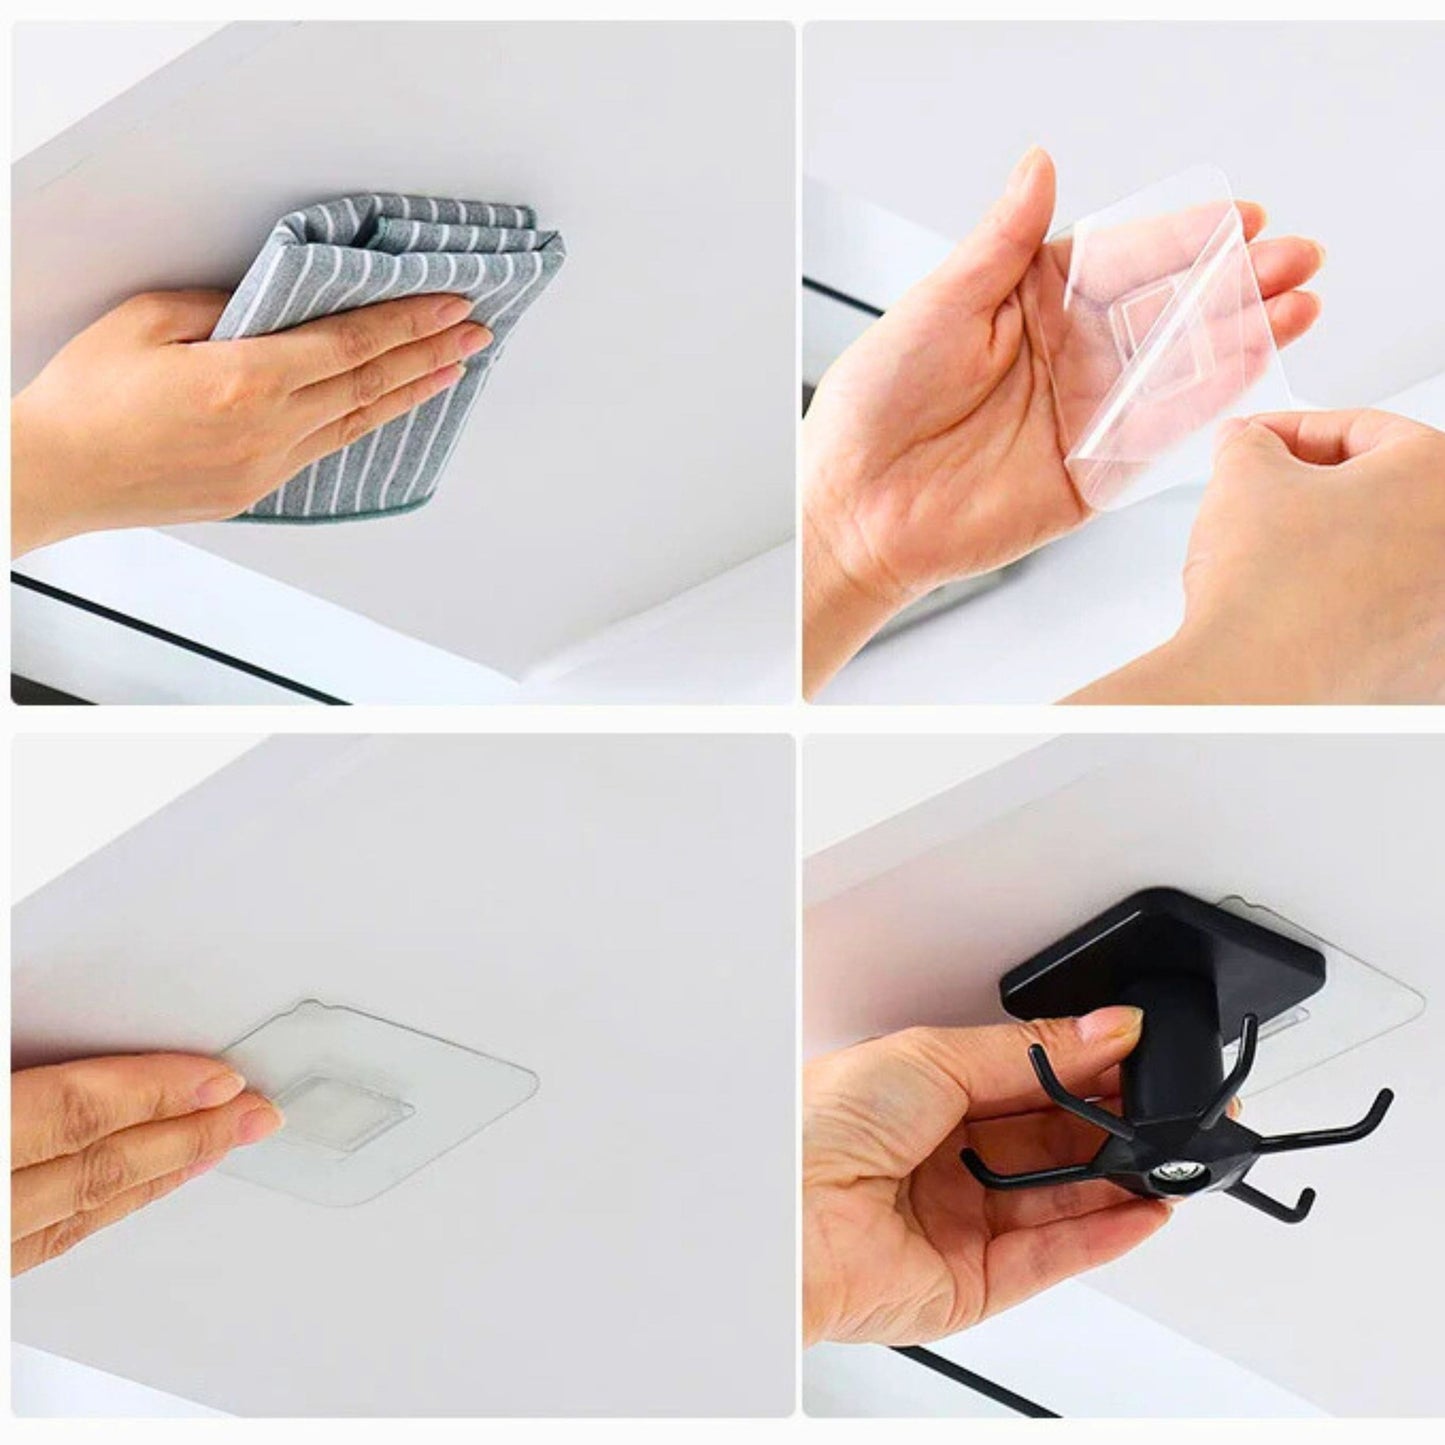 Step-by-step visuals of the installation process for an adhesive wall hook on a white surface